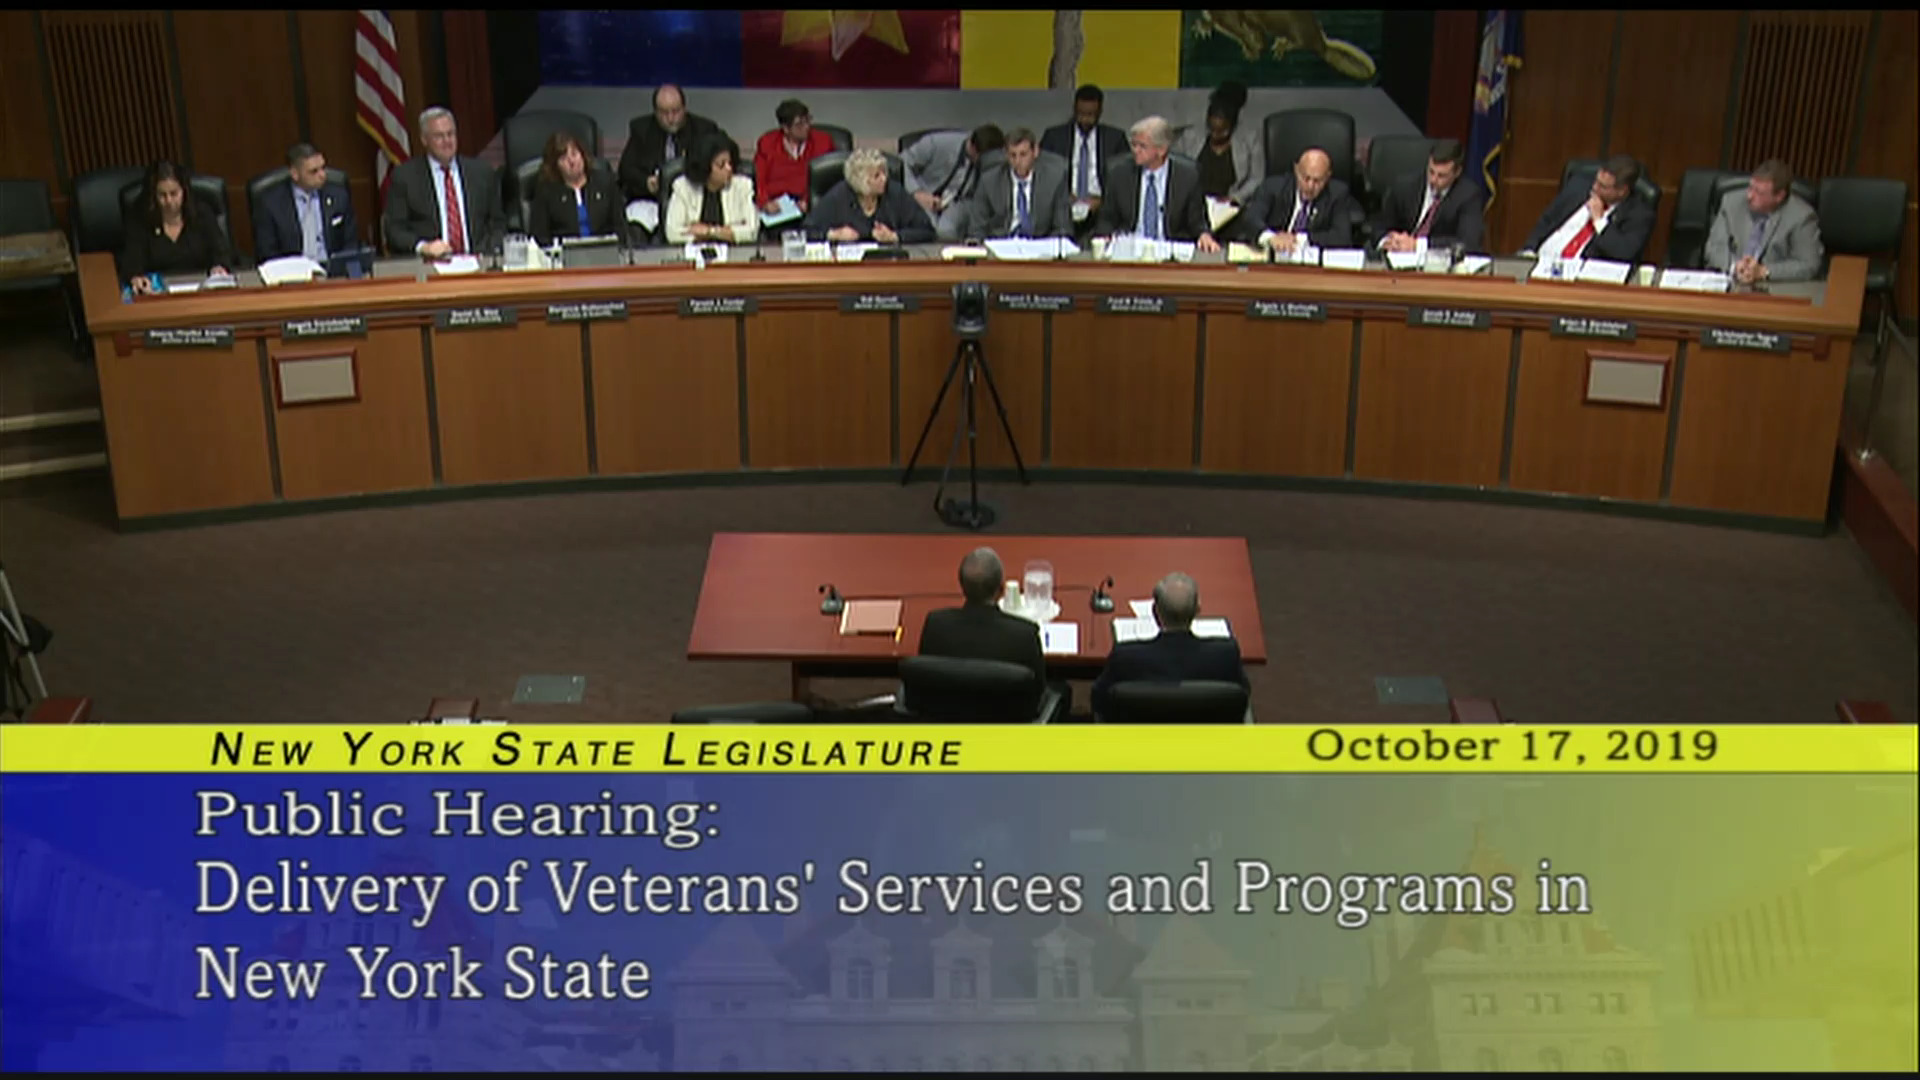 Public Hearing on the Delivery of Veterans' Services and Programs